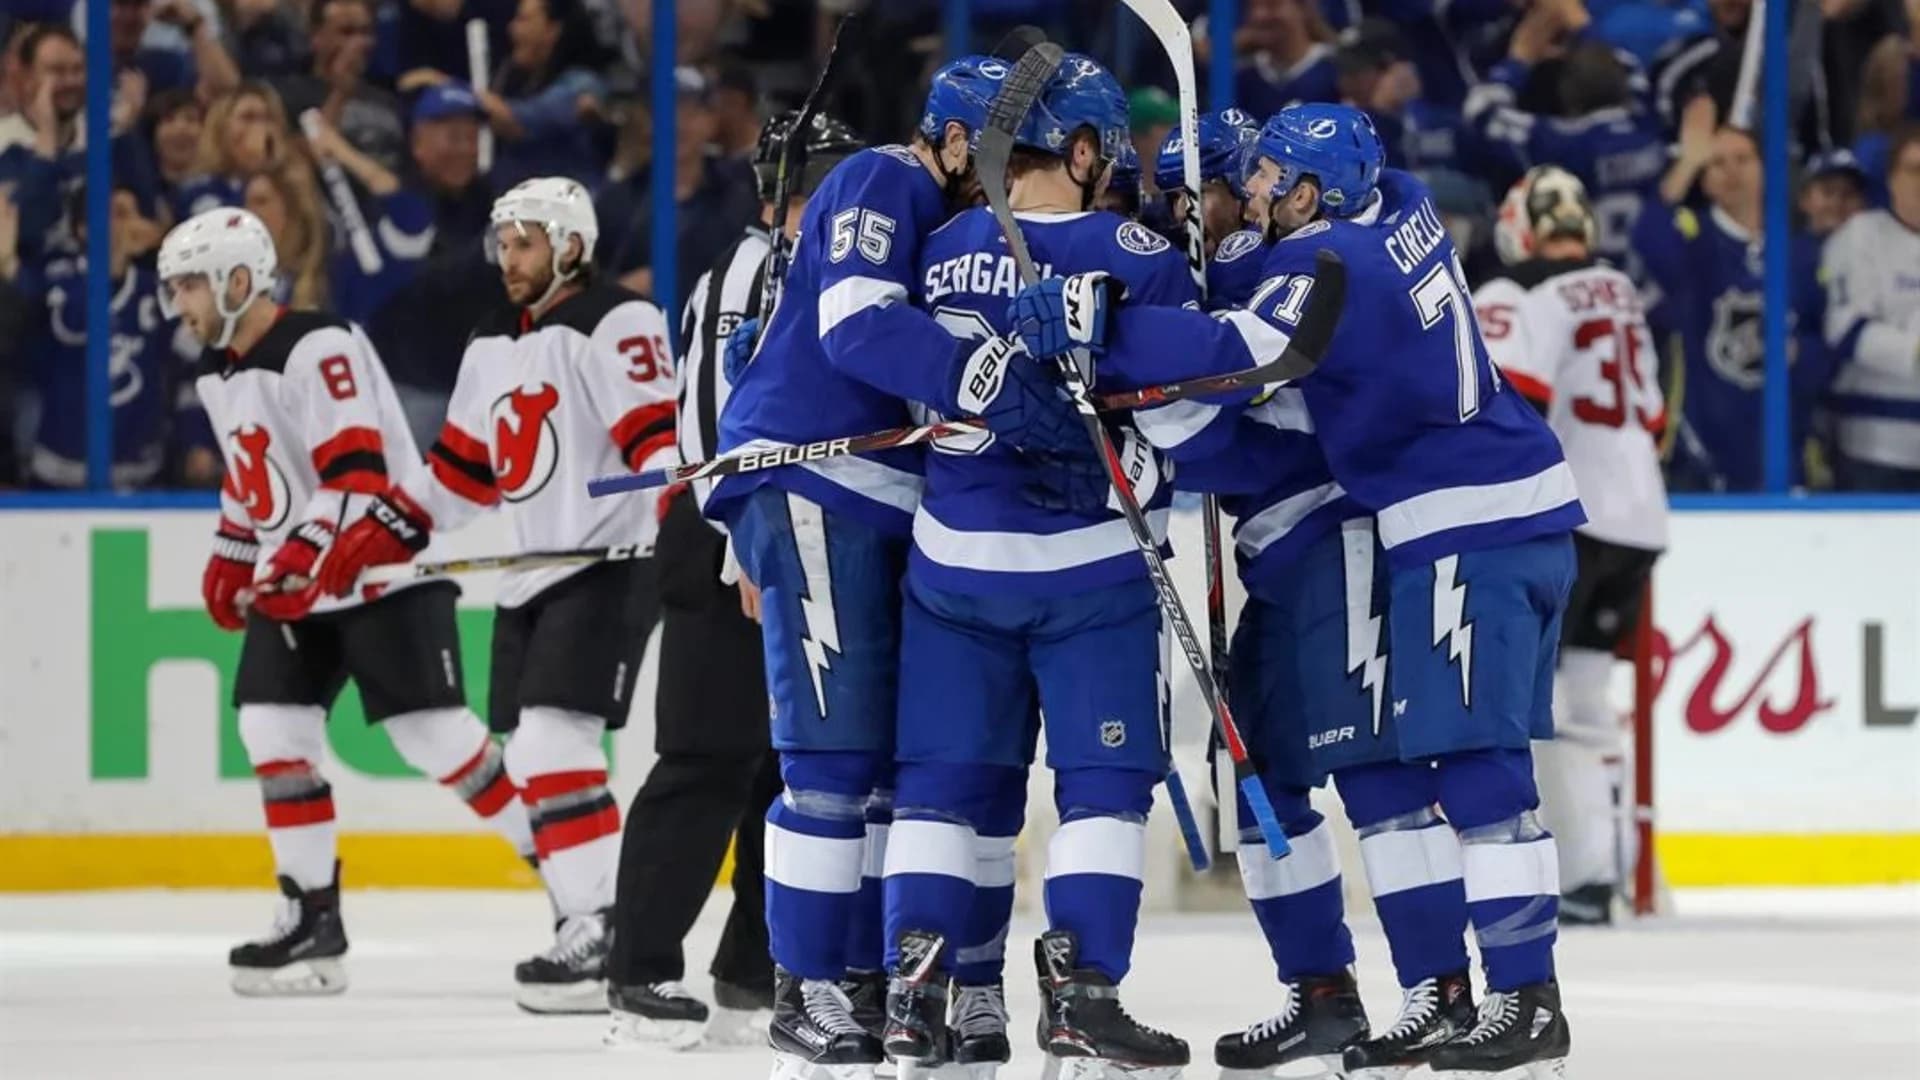 Devils ousted from playoffs with Game 5 loss